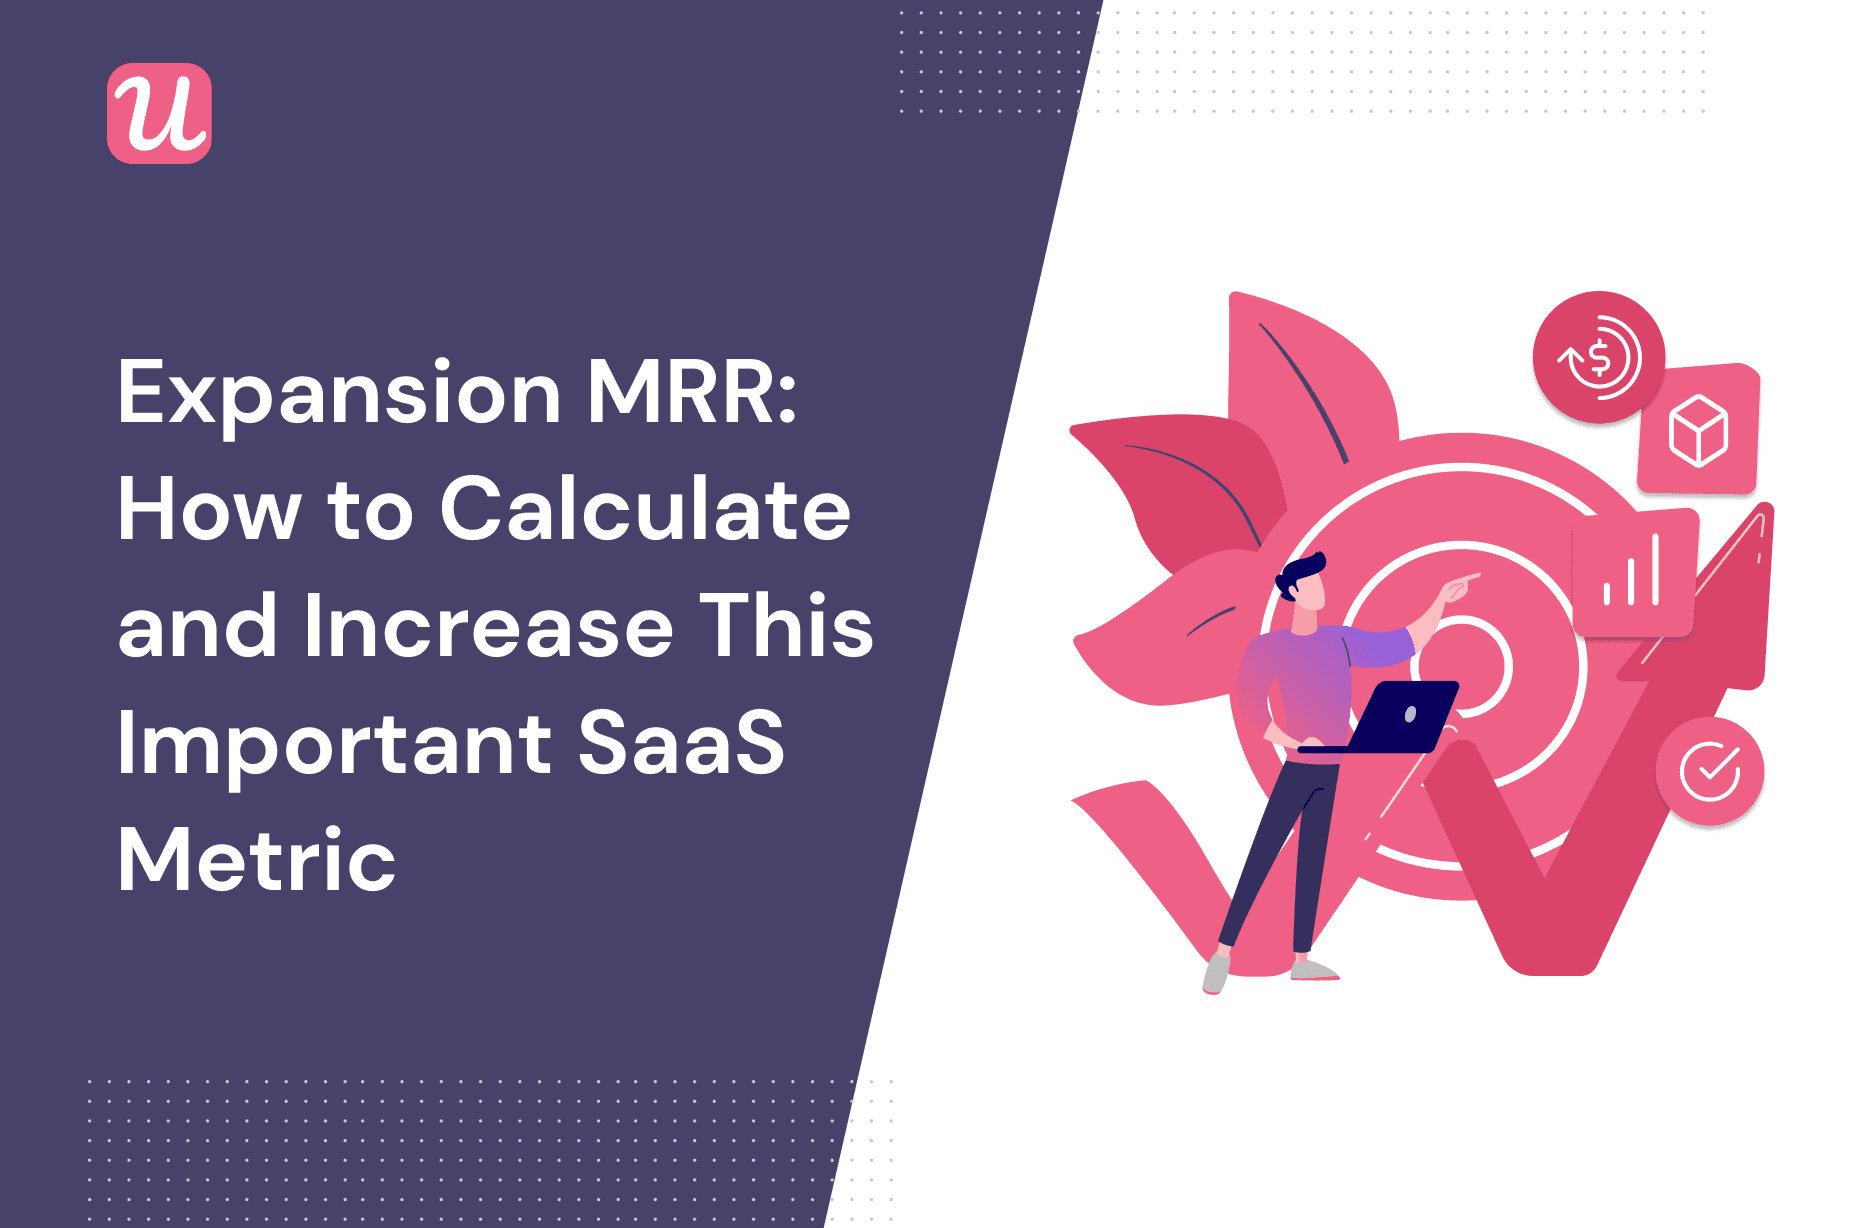 Expansion MRR: How to Calculate and Increase This Important SaaS Metric [+Examples]